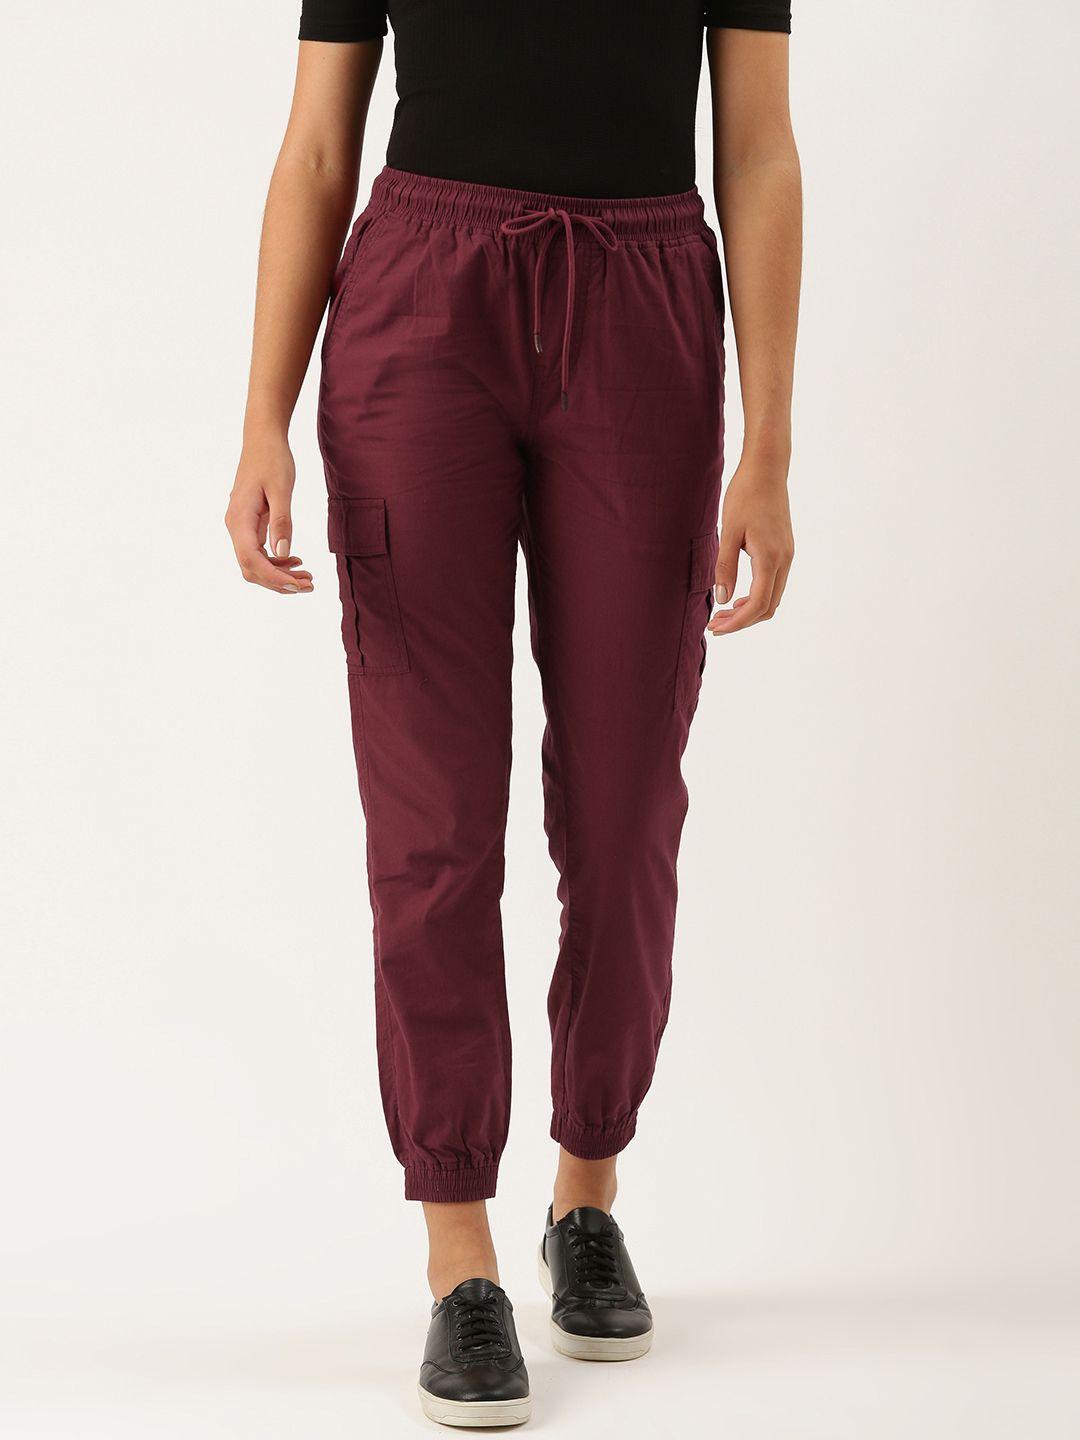 ivoc women maroon solid pure cotton regular fit mid-rise casual joggers